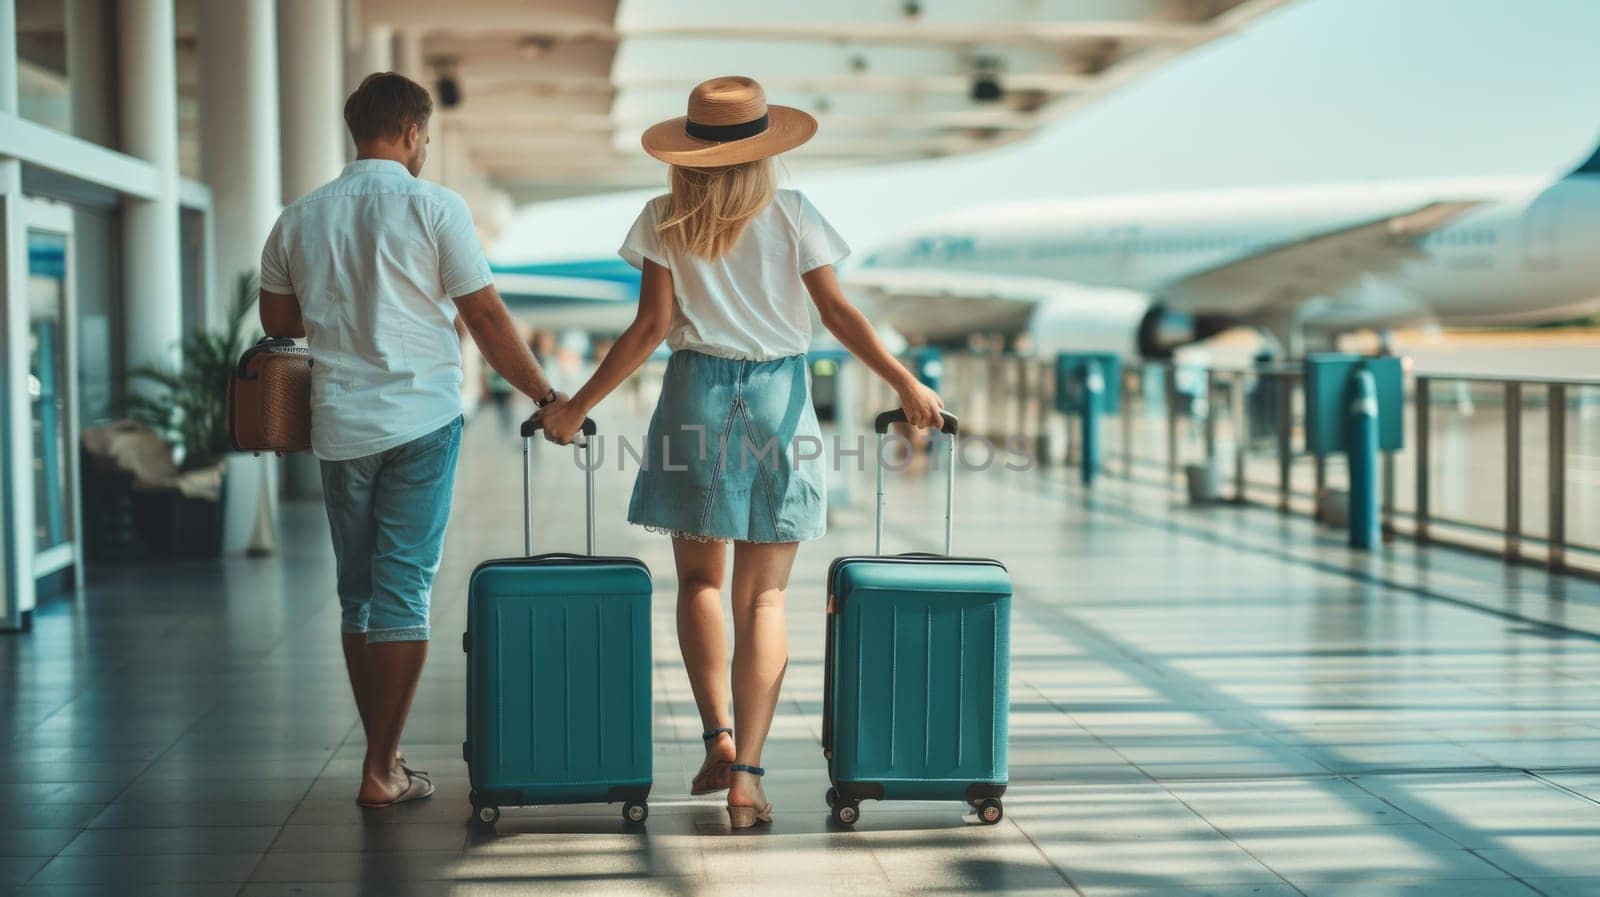 A man and woman walking with two suitcases in an airport, AI by starush